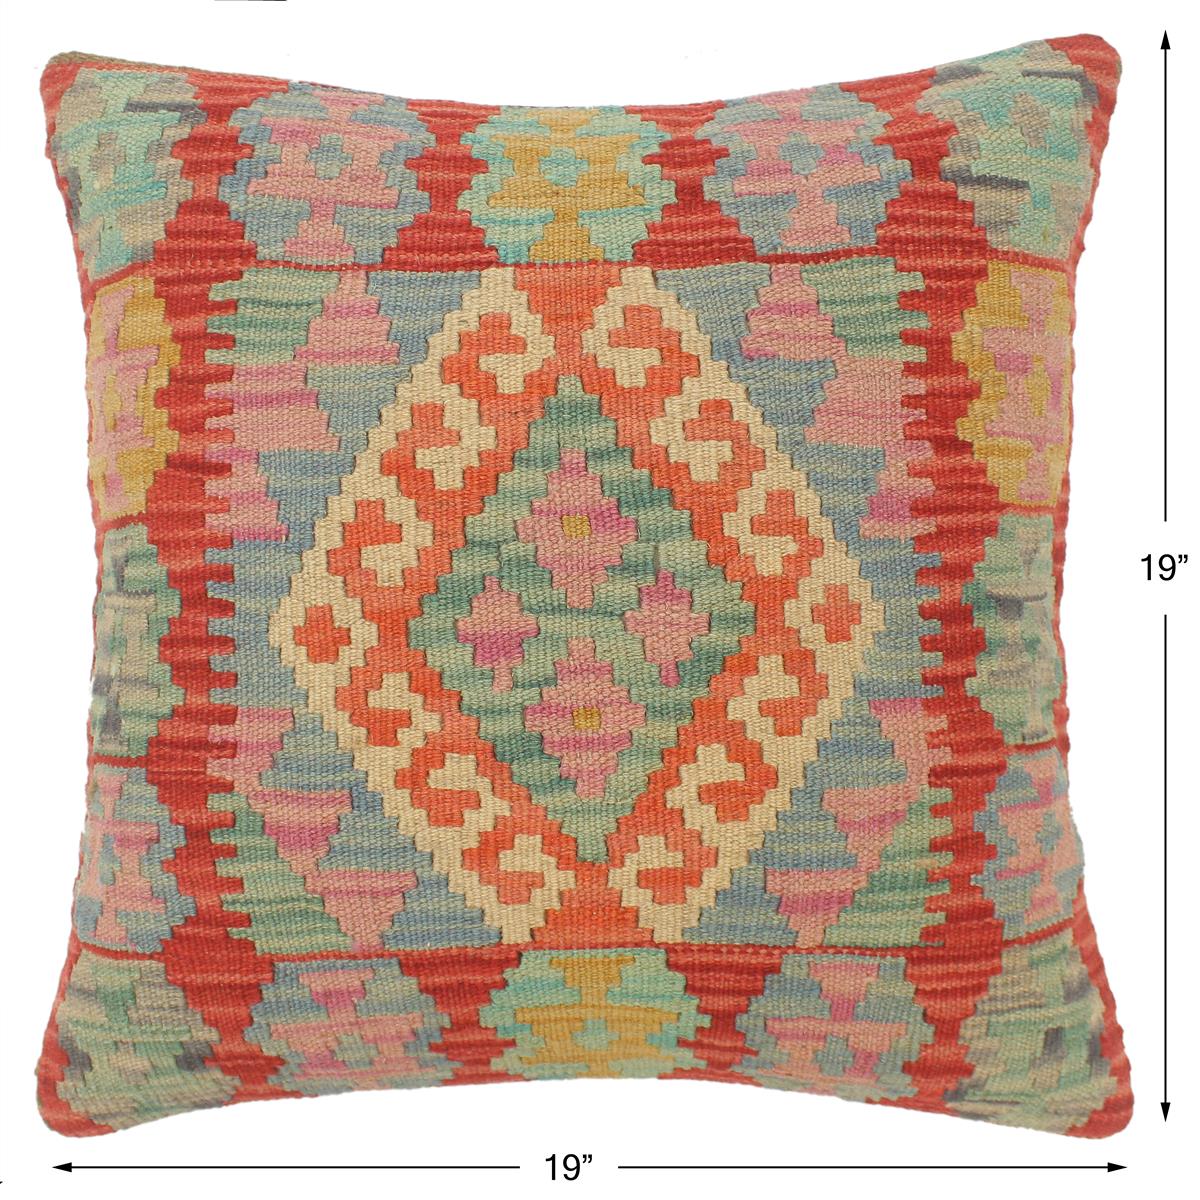 handmade Tribal Turkish Antique Blue Red Hand-Woven SQUARE 100% WOOL pillow